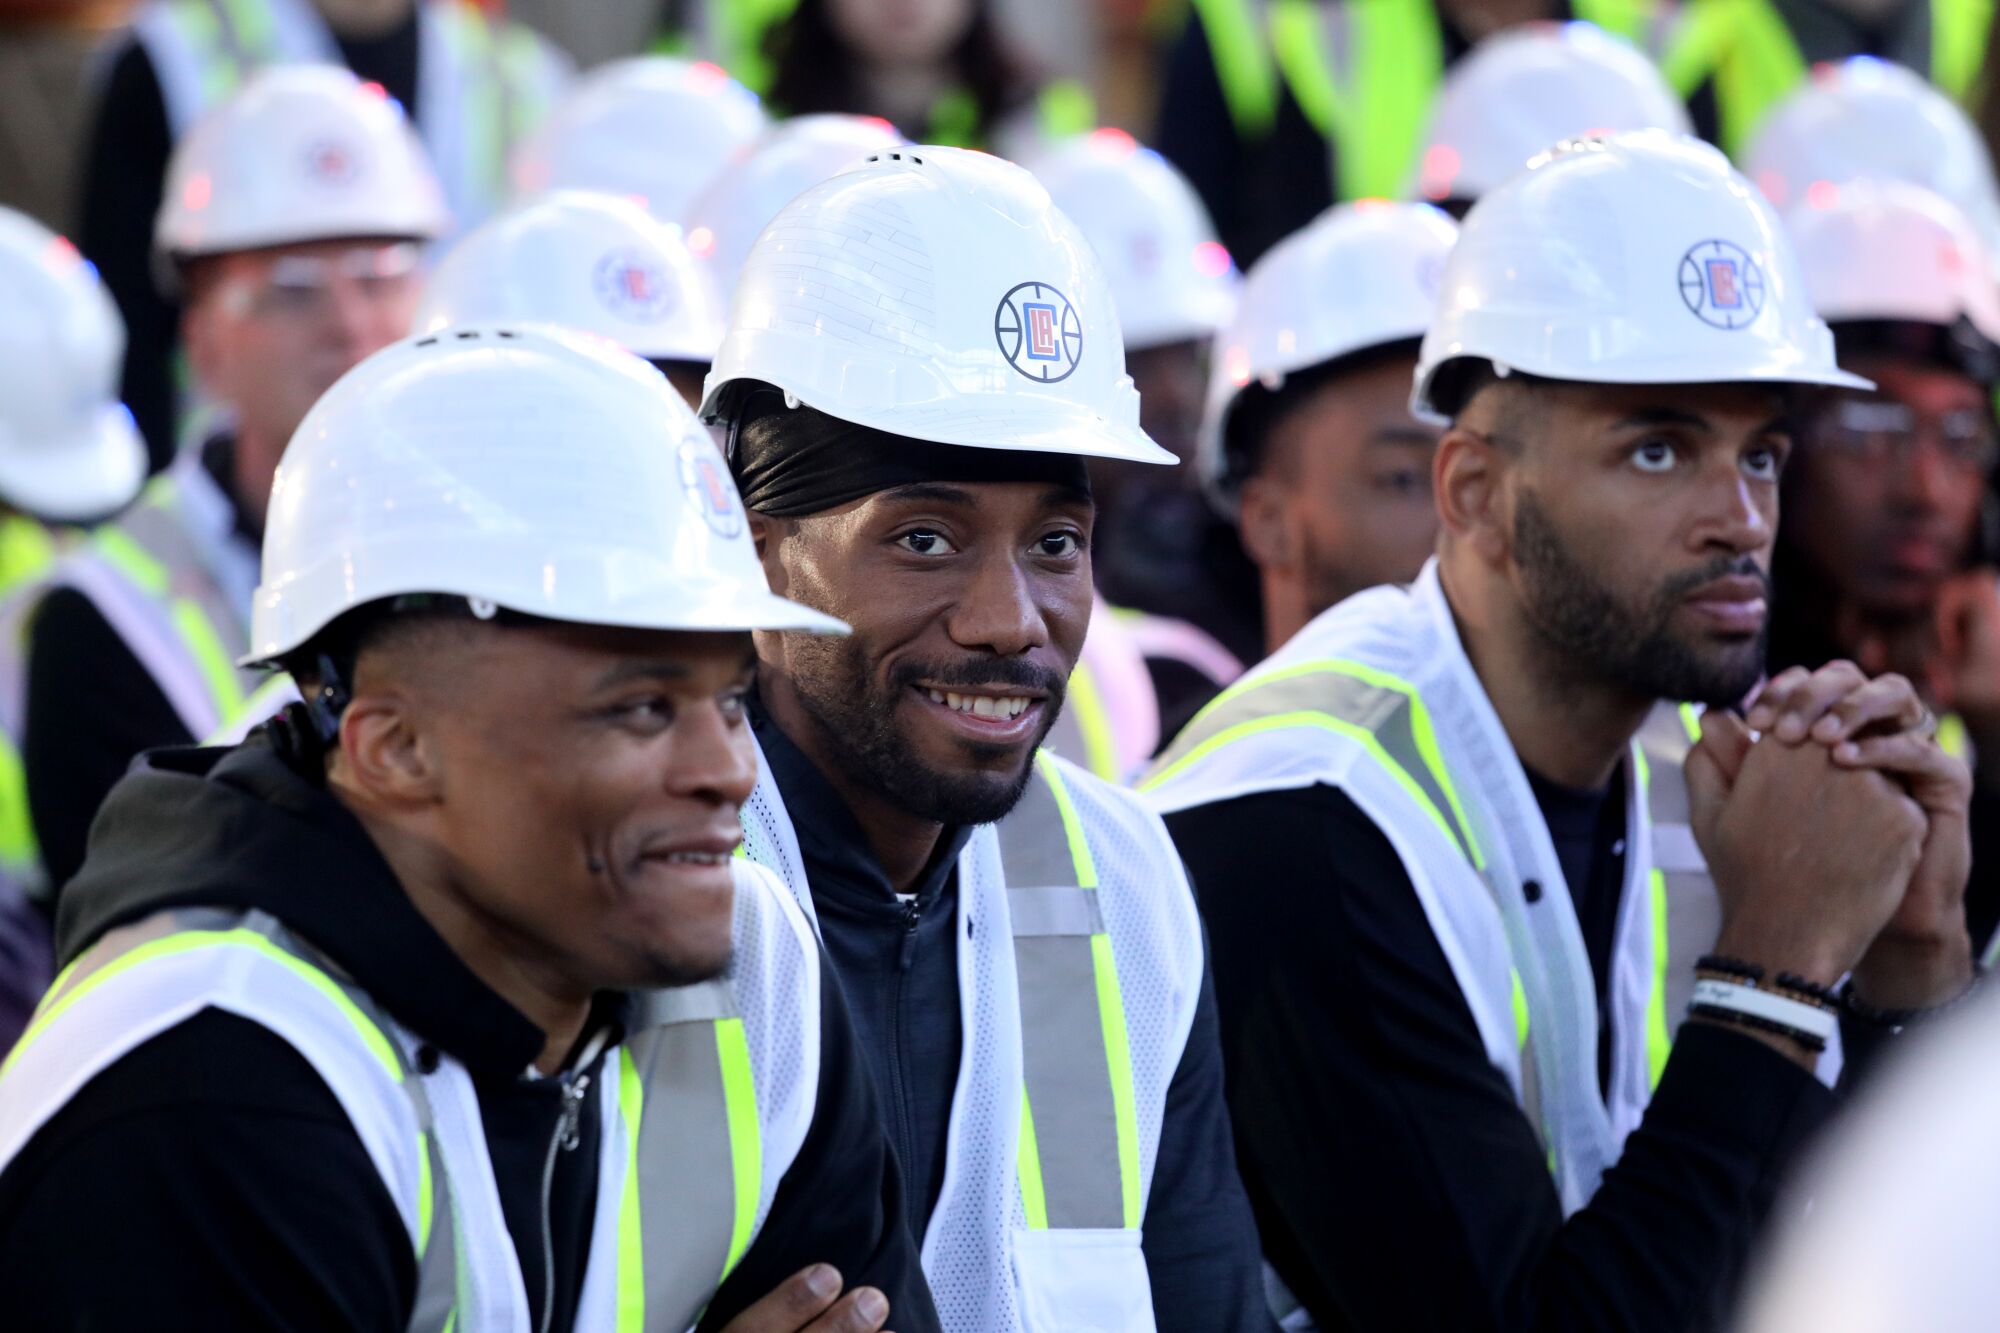 Russell Westbrook and Kawhi Leonard are all smiles as they watch from their seats during an event at the Intuit Dome.